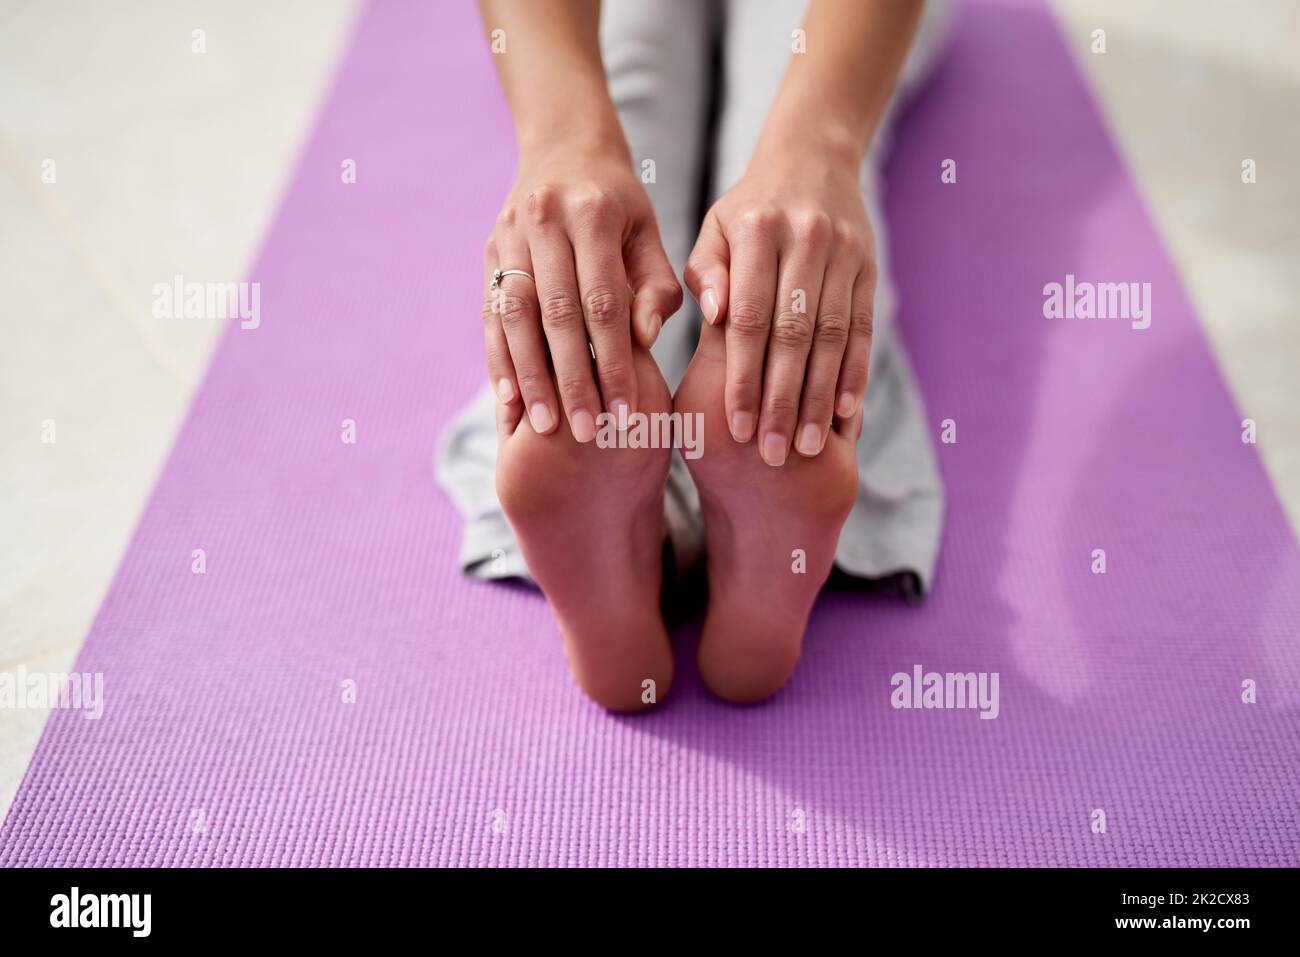 Keeping supple and lithe with yoga. Shot of a young woman touching her toes while practicing yoga outside on a sunny day. Stock Photo